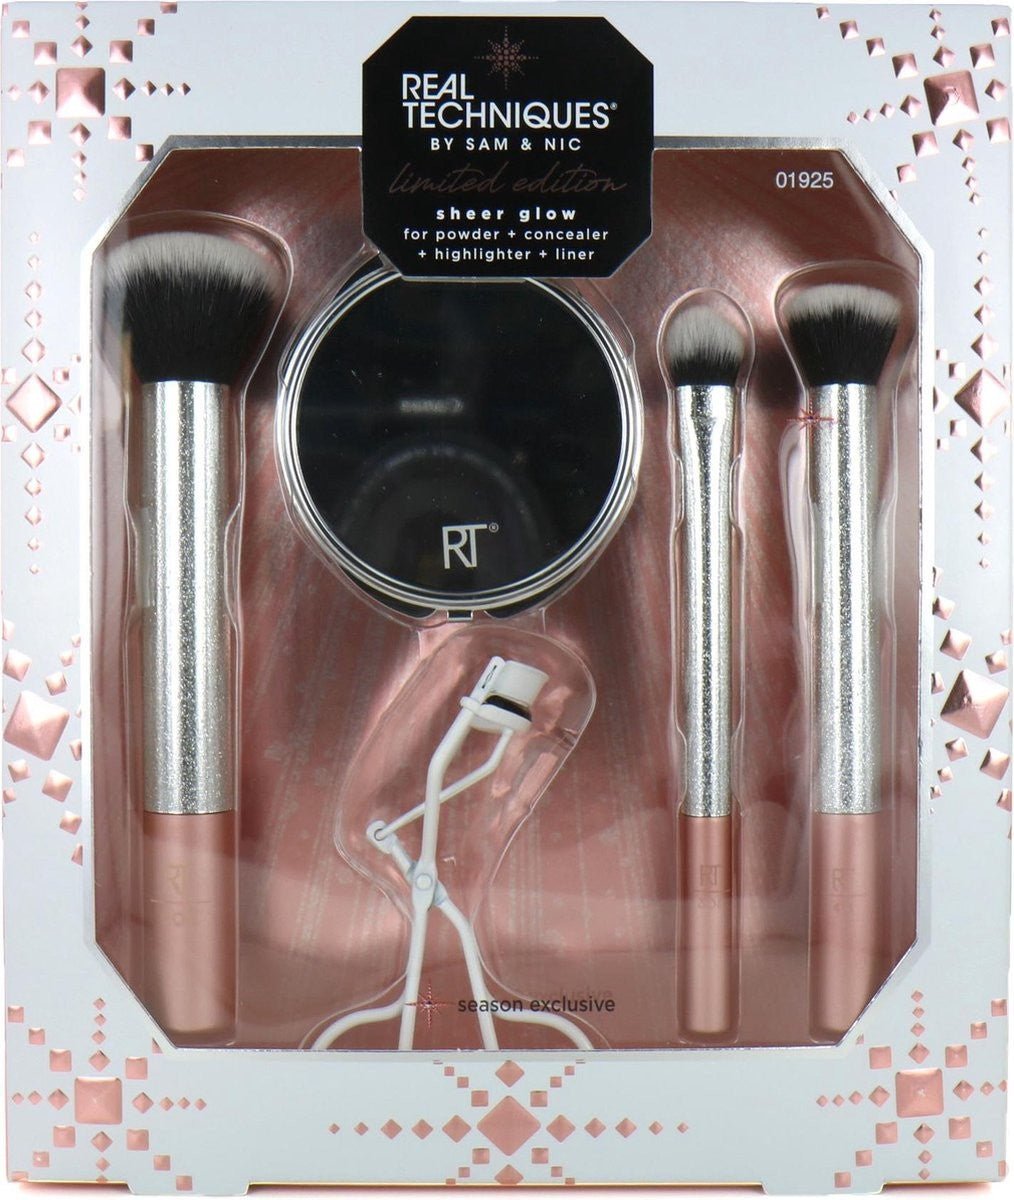 Real Techniques Sheer Glow Brush Set Limited Edition - BEAUTEPRICE Real Techniques Sheer Glow Brush Set Limited Edition beautypriceboutique BEAUTEPRICE